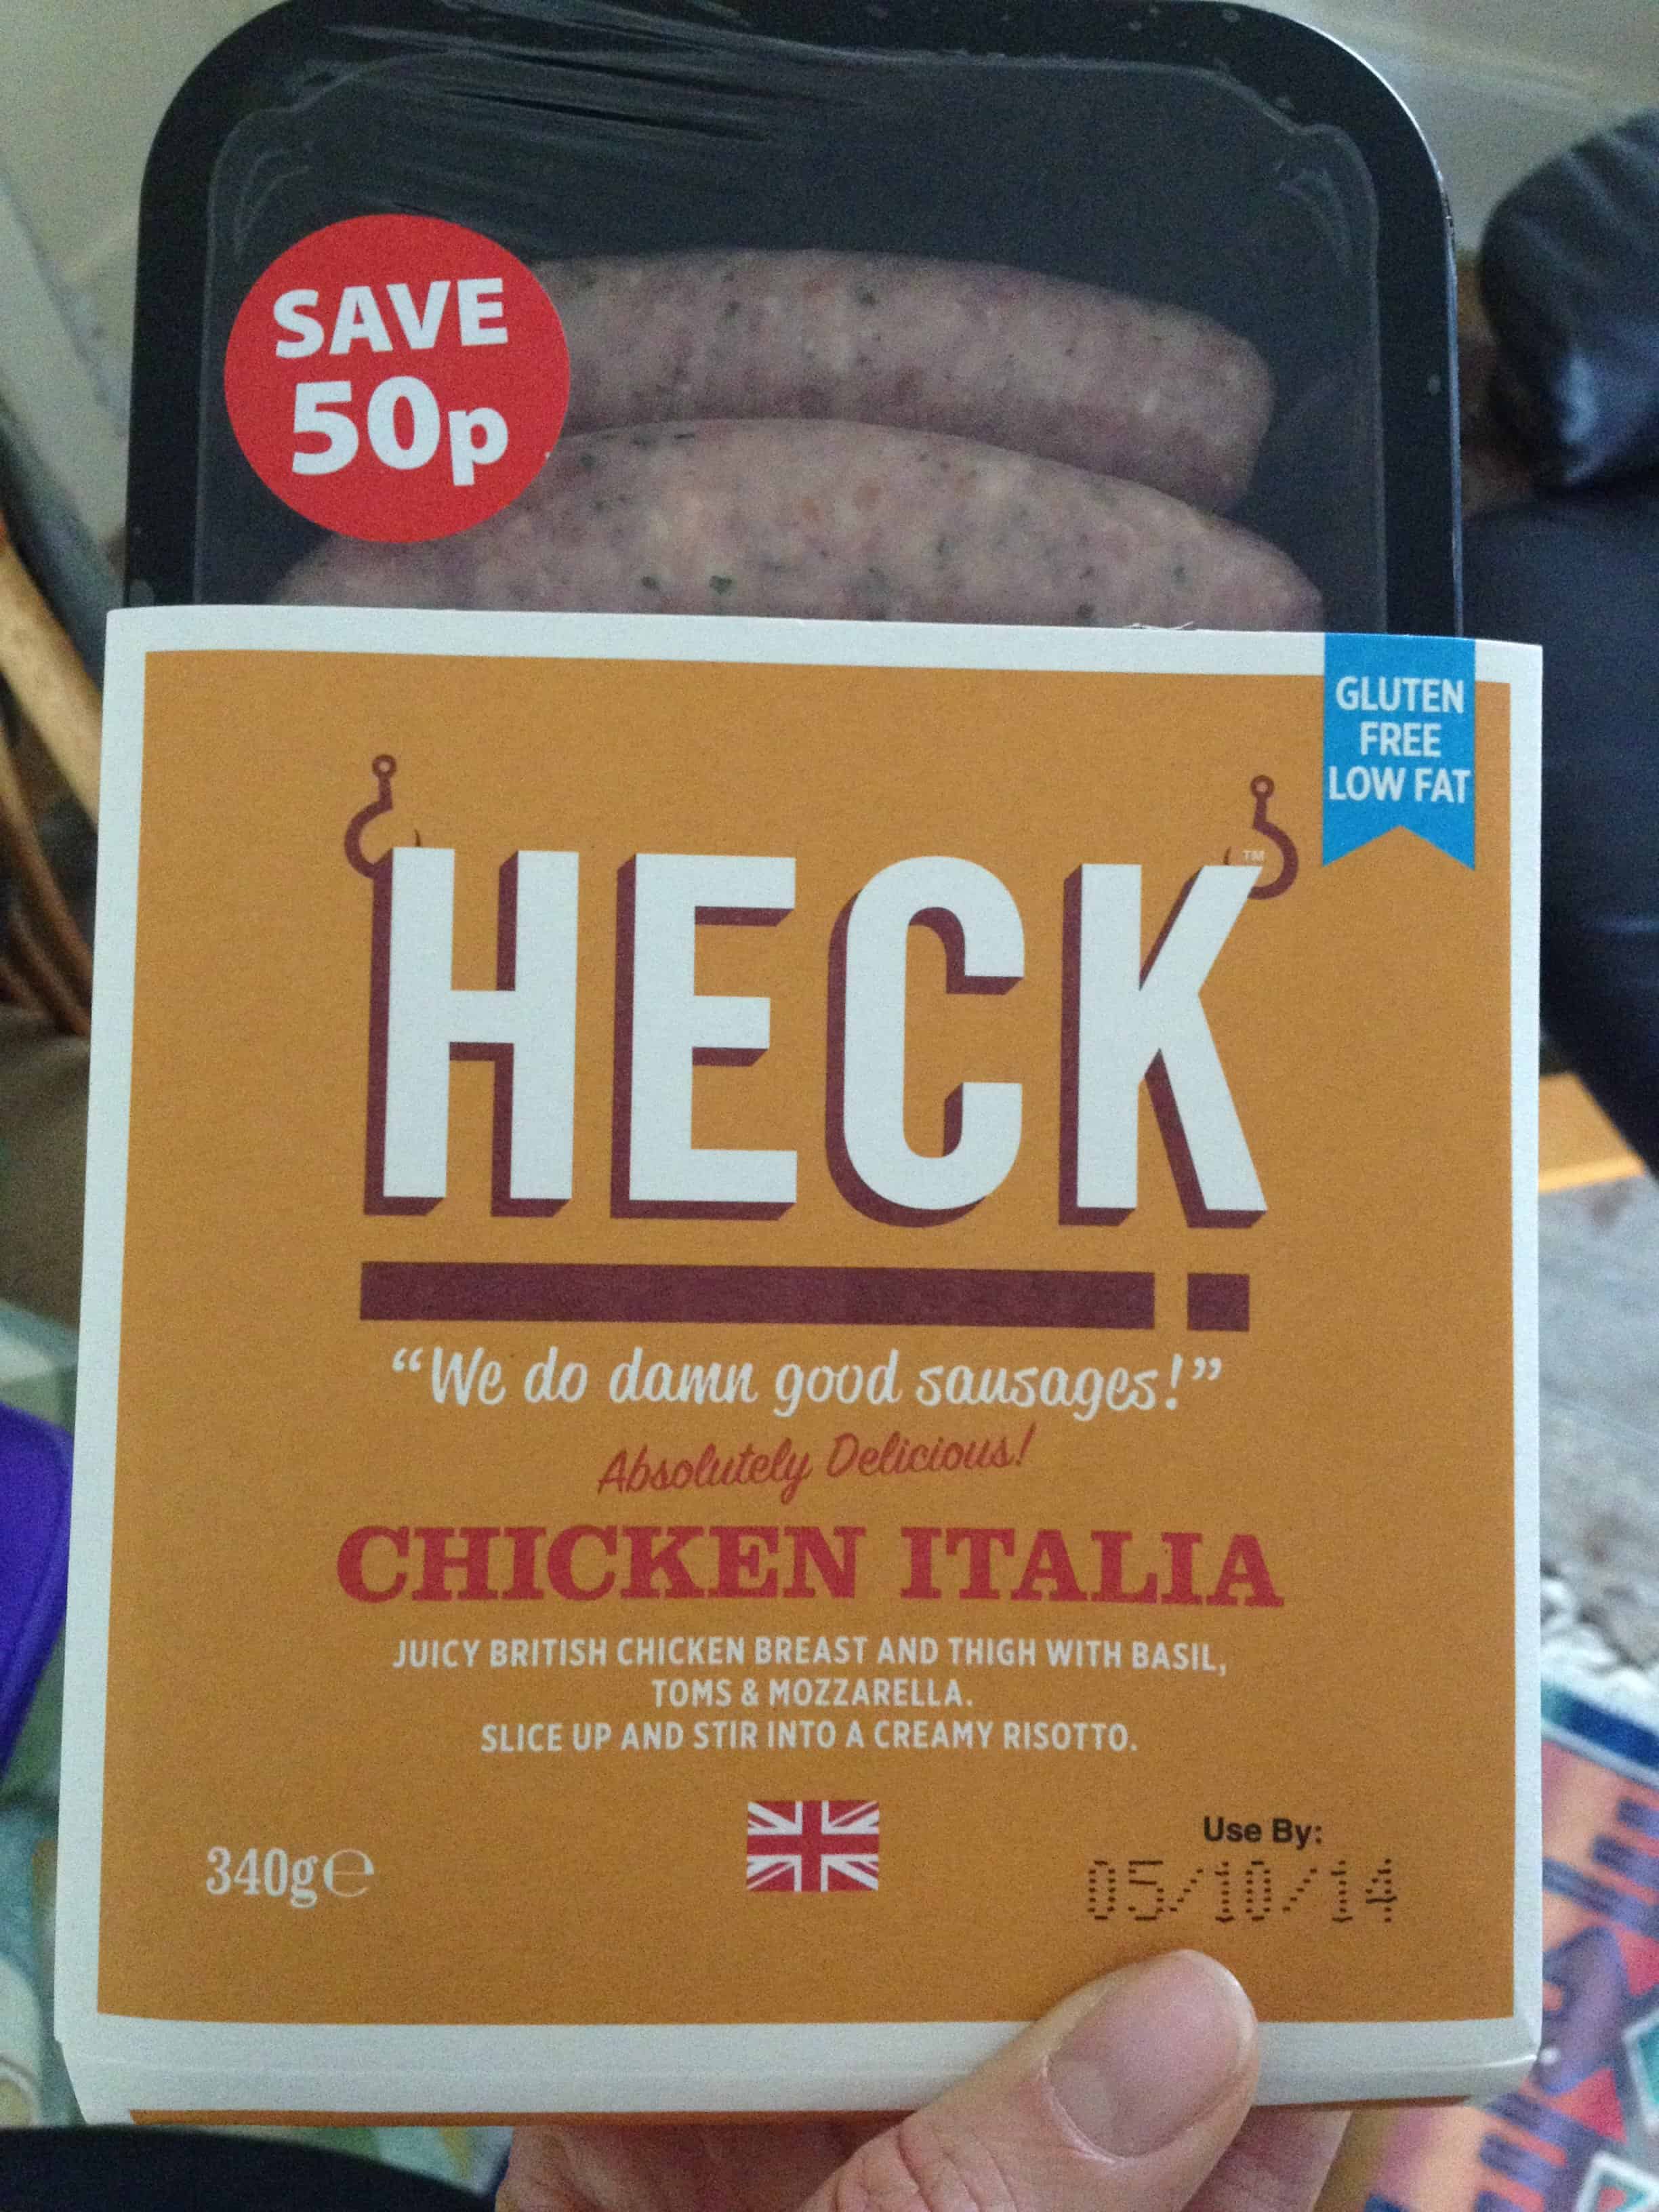 Chicken sausages from Heck.